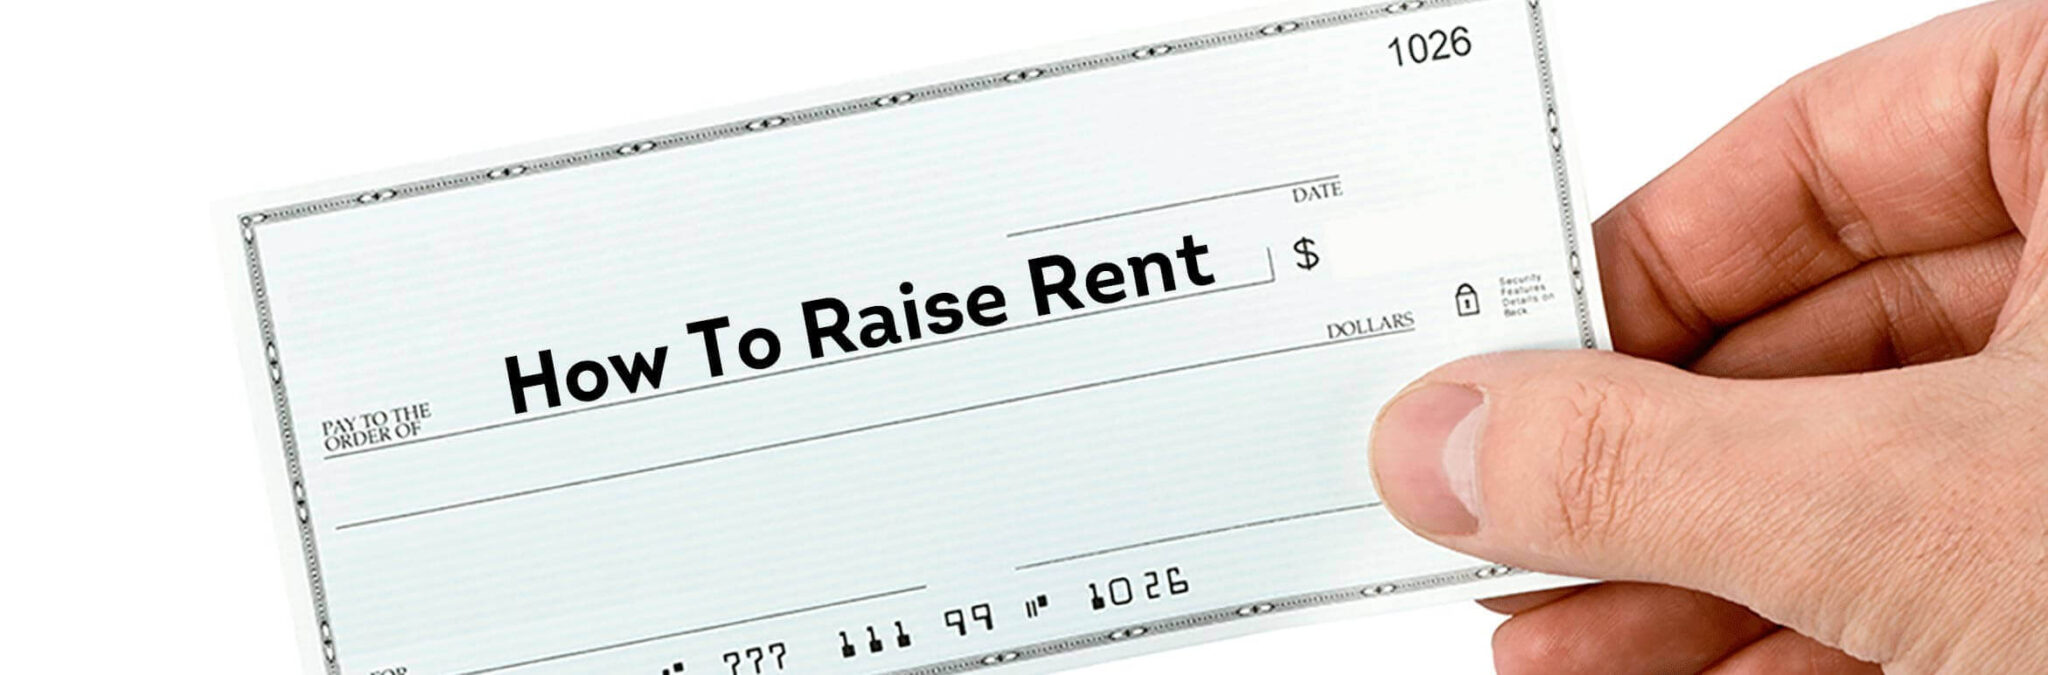 Guidelines For Increasing The Rent ACCL Property Management